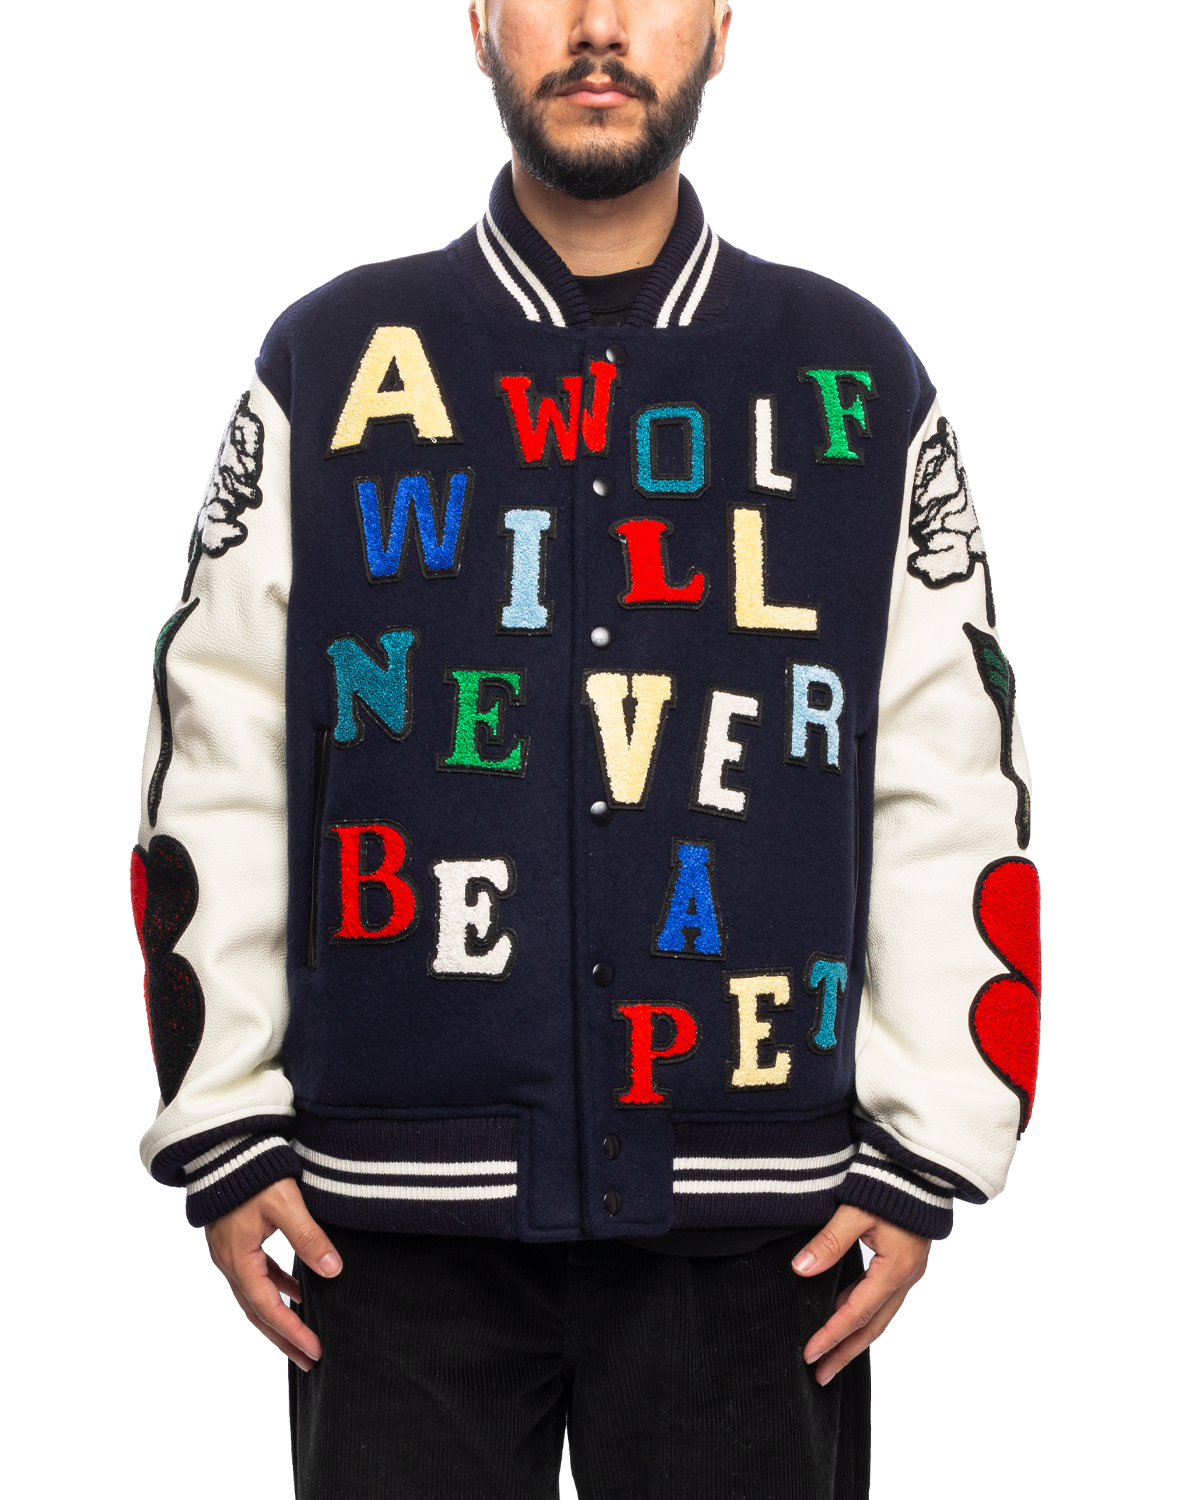 UC2C4206-2 A Wolf Will Never Be A Pet Jacket Navy